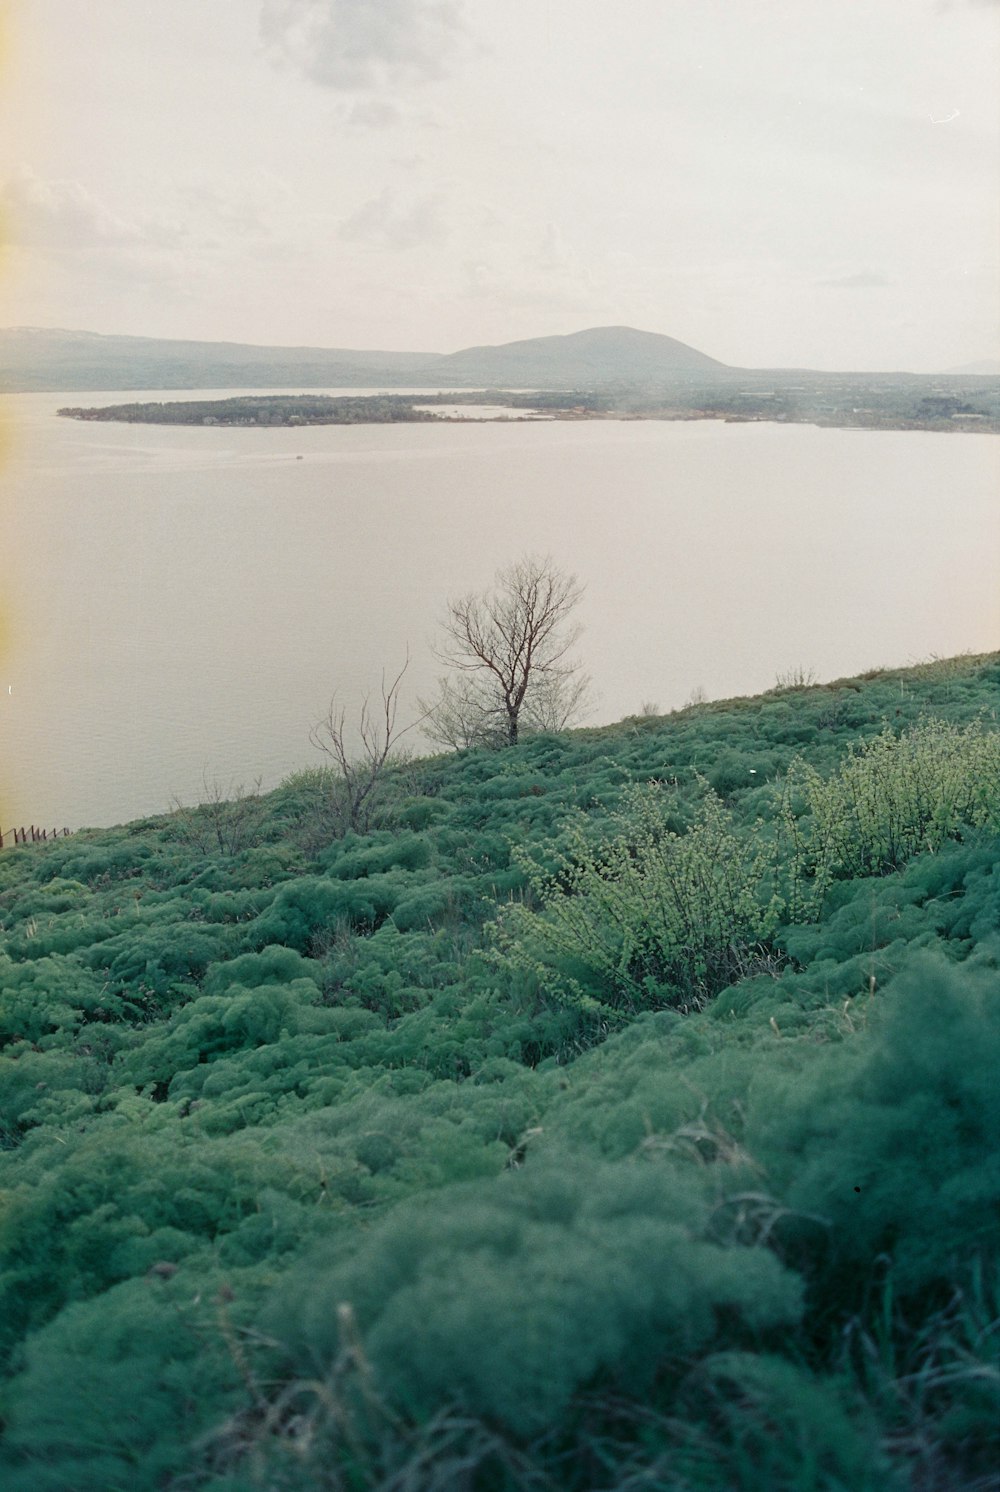 a lone tree on a grassy hill overlooking a body of water